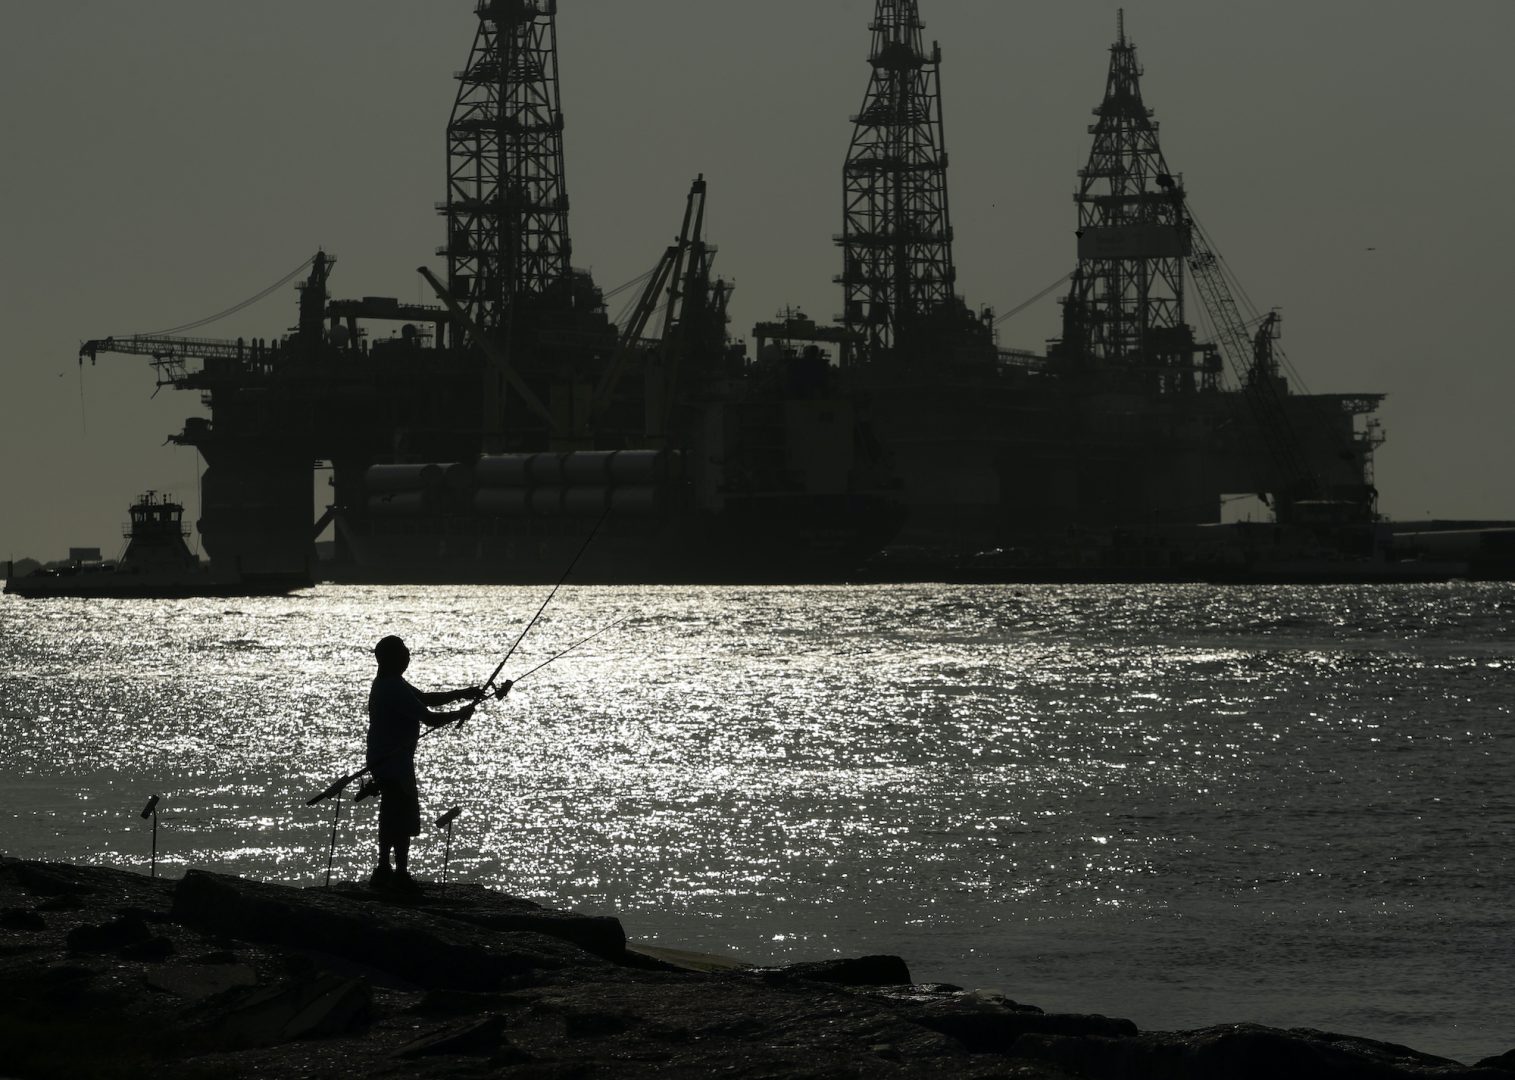 FILE - A man wears a face mark as he fishes near docked oil drilling platforms, Friday, May 8, 2020, in Port Aransas, Texas. The U.S. Interior Department on Wednesday, Nov. 17, 2021, is auctioning vast oil reserves in the Gulf of Mexico estimated to hold up to 1.1 billion barrels of crude. It's the first such sale under President Joe Biden and underscores the challenges he faces to reach climate goals that rely on cuts in fossil fuel emissions.  